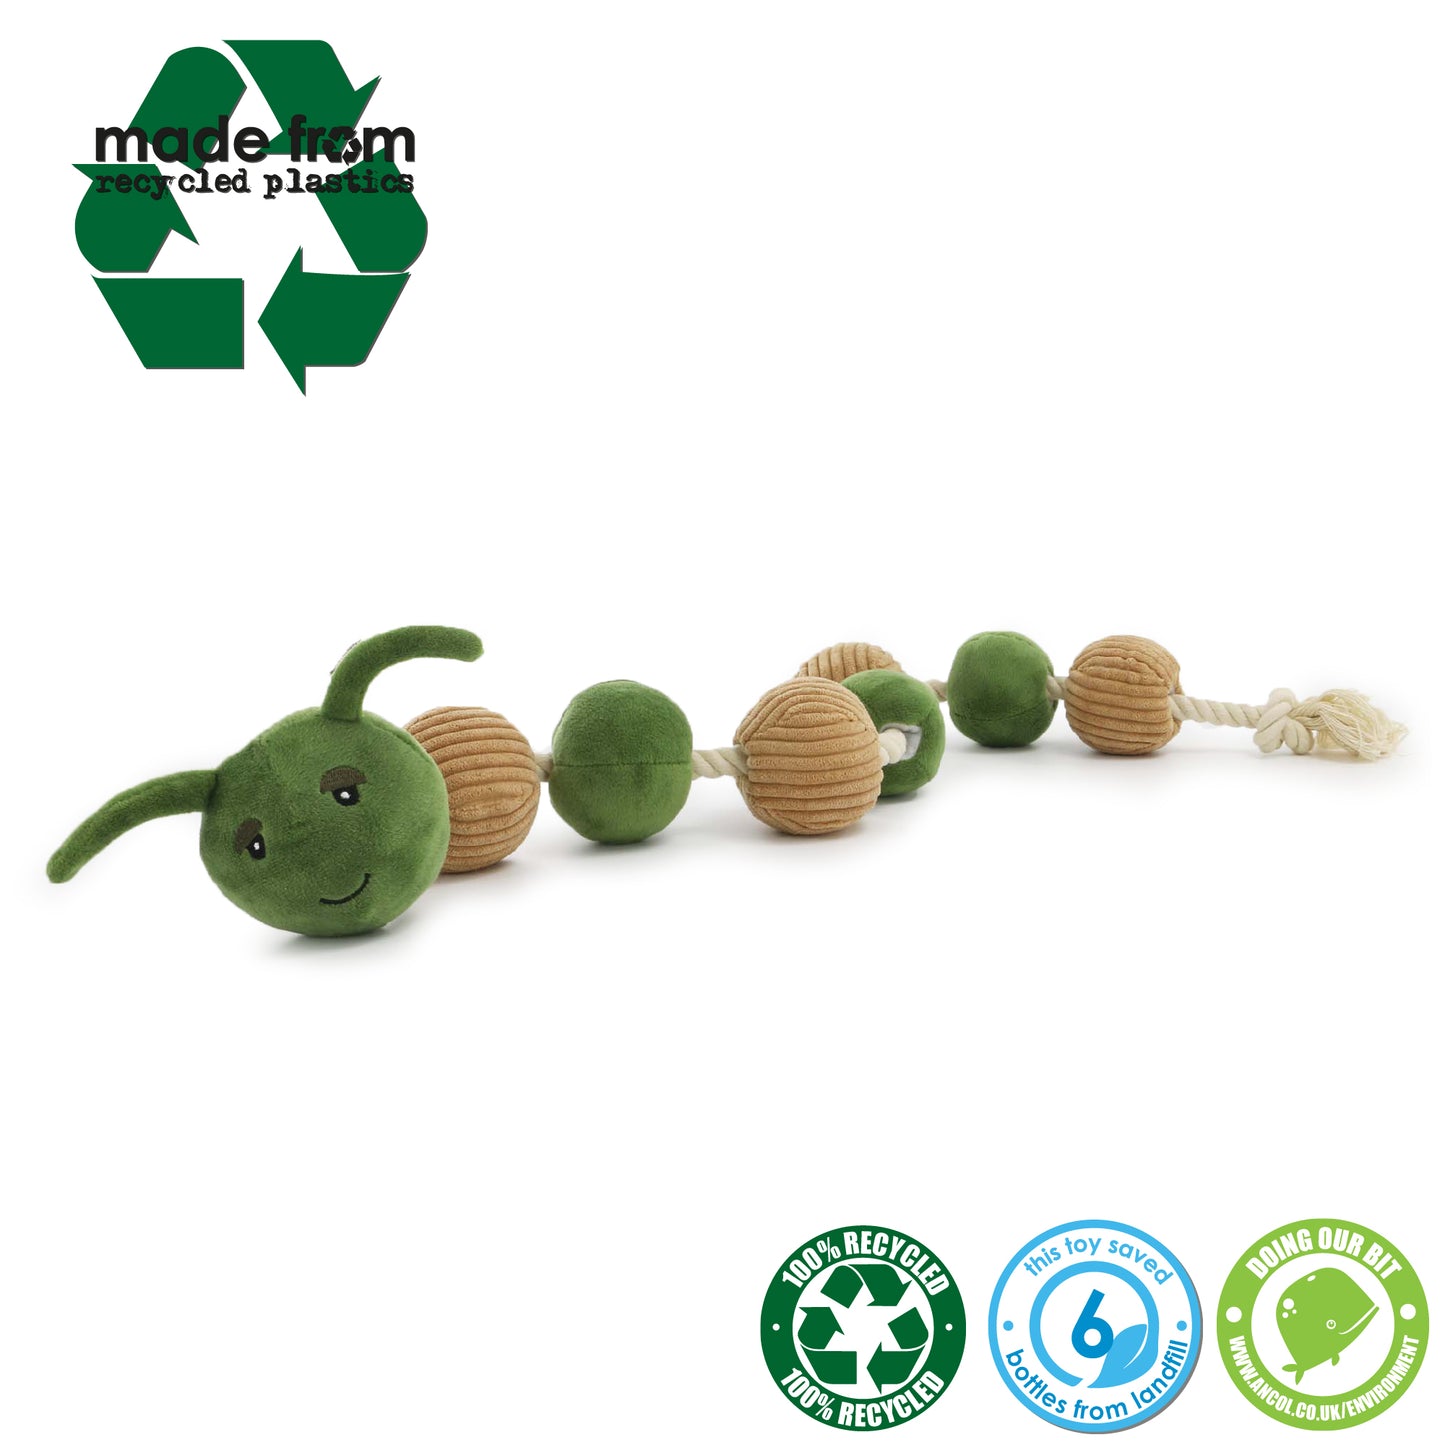 image shows a dog toy rope catapillar made with green and cream balls for the body and a larger head with a sqeaker